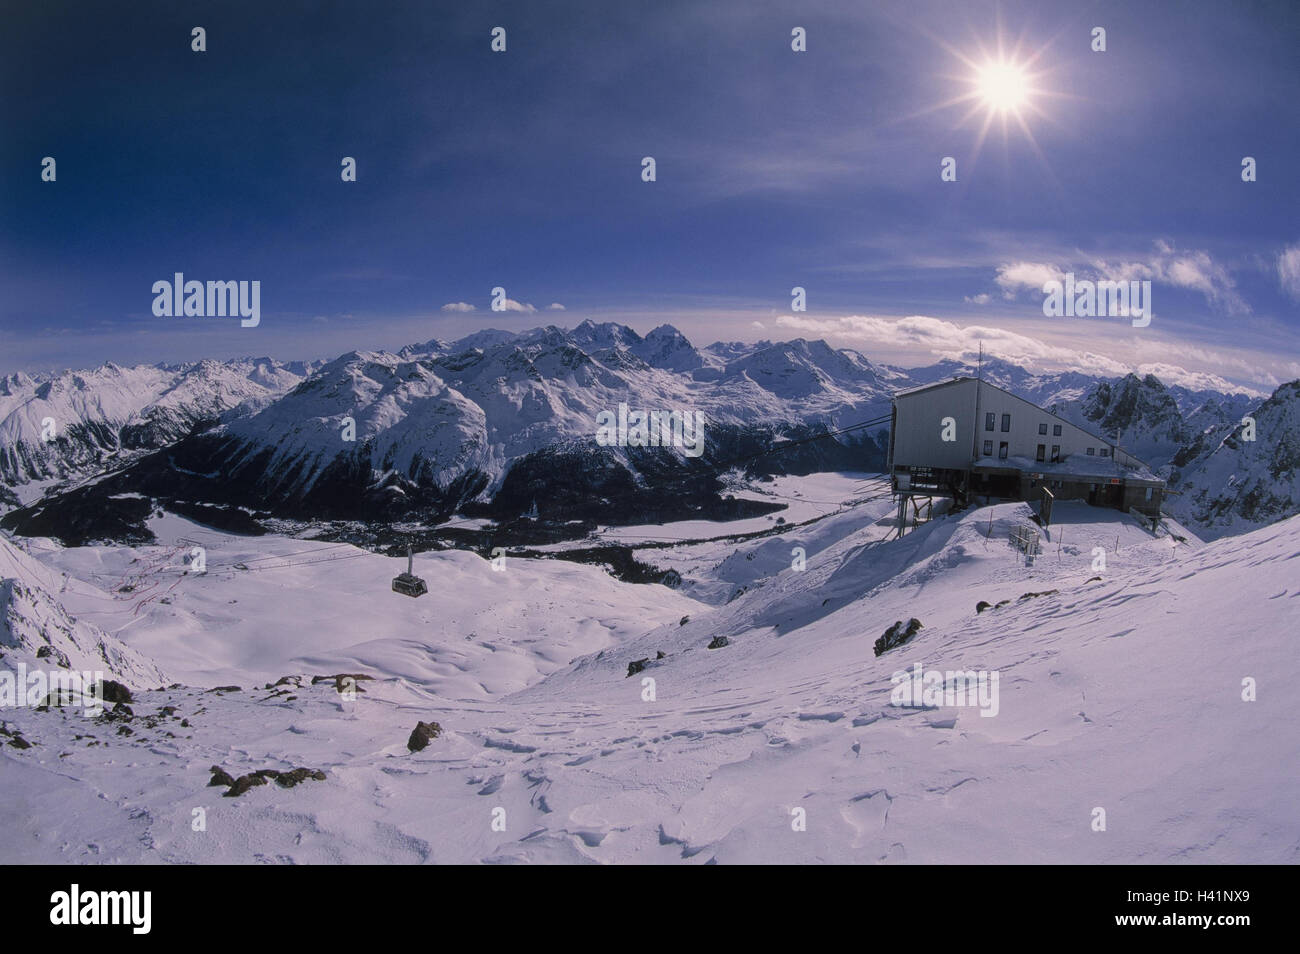 Ski region corviglia High Resolution Stock Photography and Images - Alamy